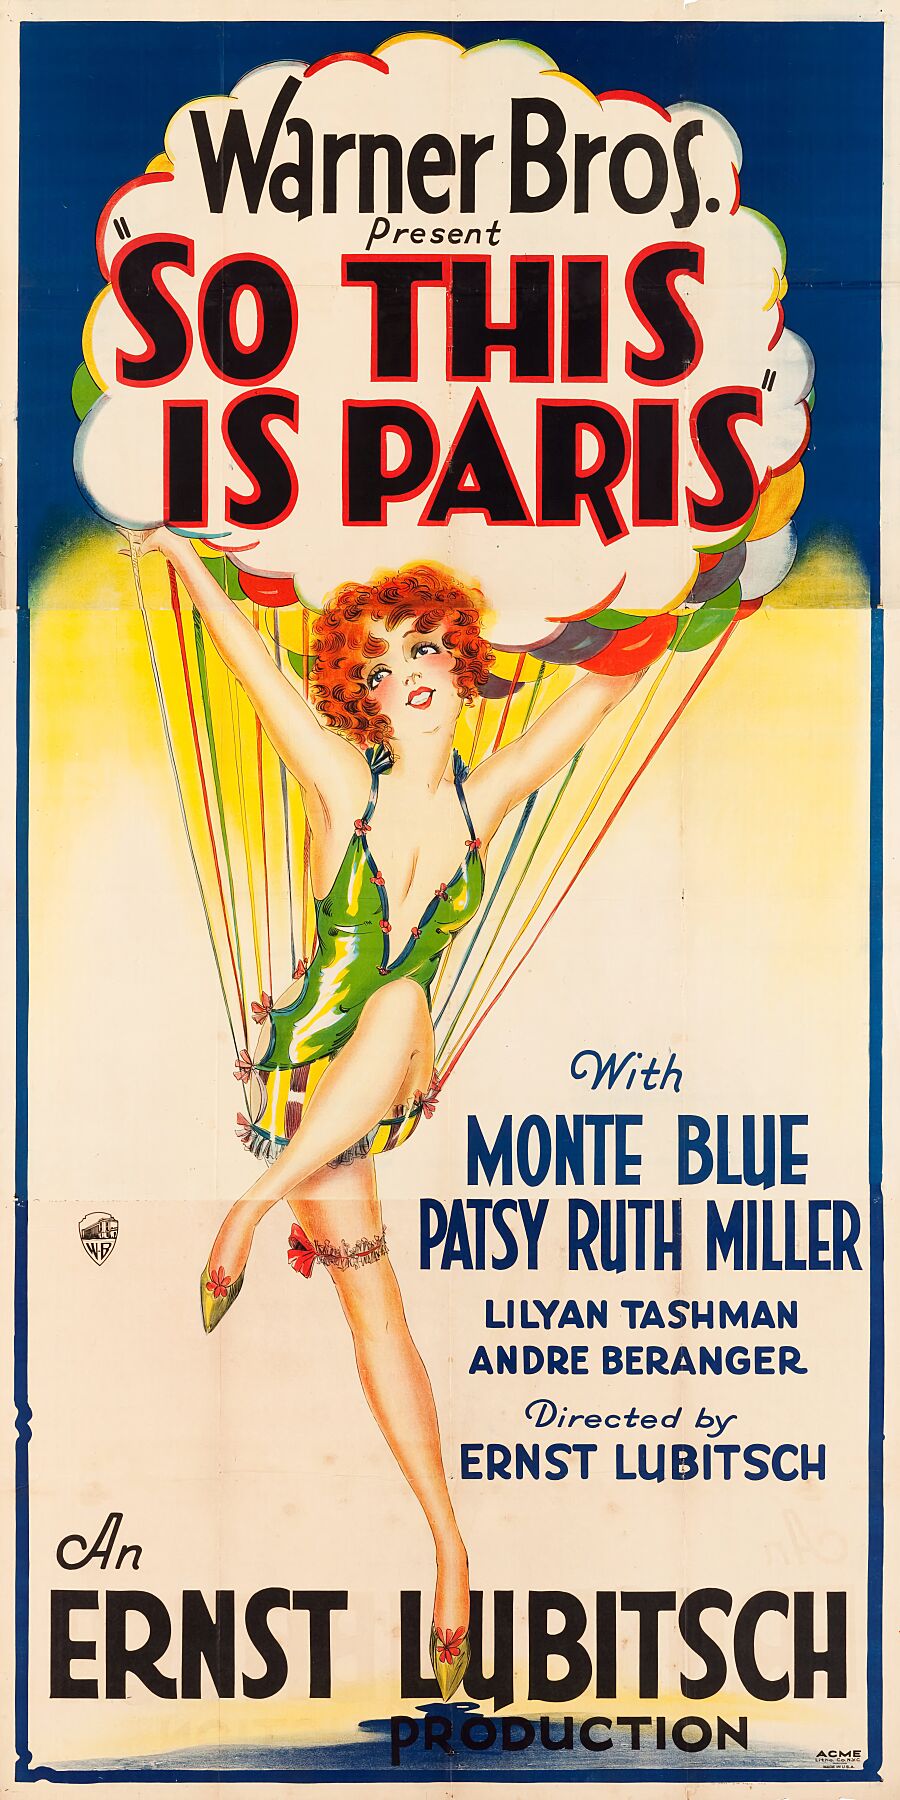 So This Is Paris is a 1926 American silent comedy film produced and distributed by Warner Bros. and directed by Ernst Lubitsch. It is based on the 1872 stage play Le Reveillon by Henri Meilhac and Ludovic Halévy.